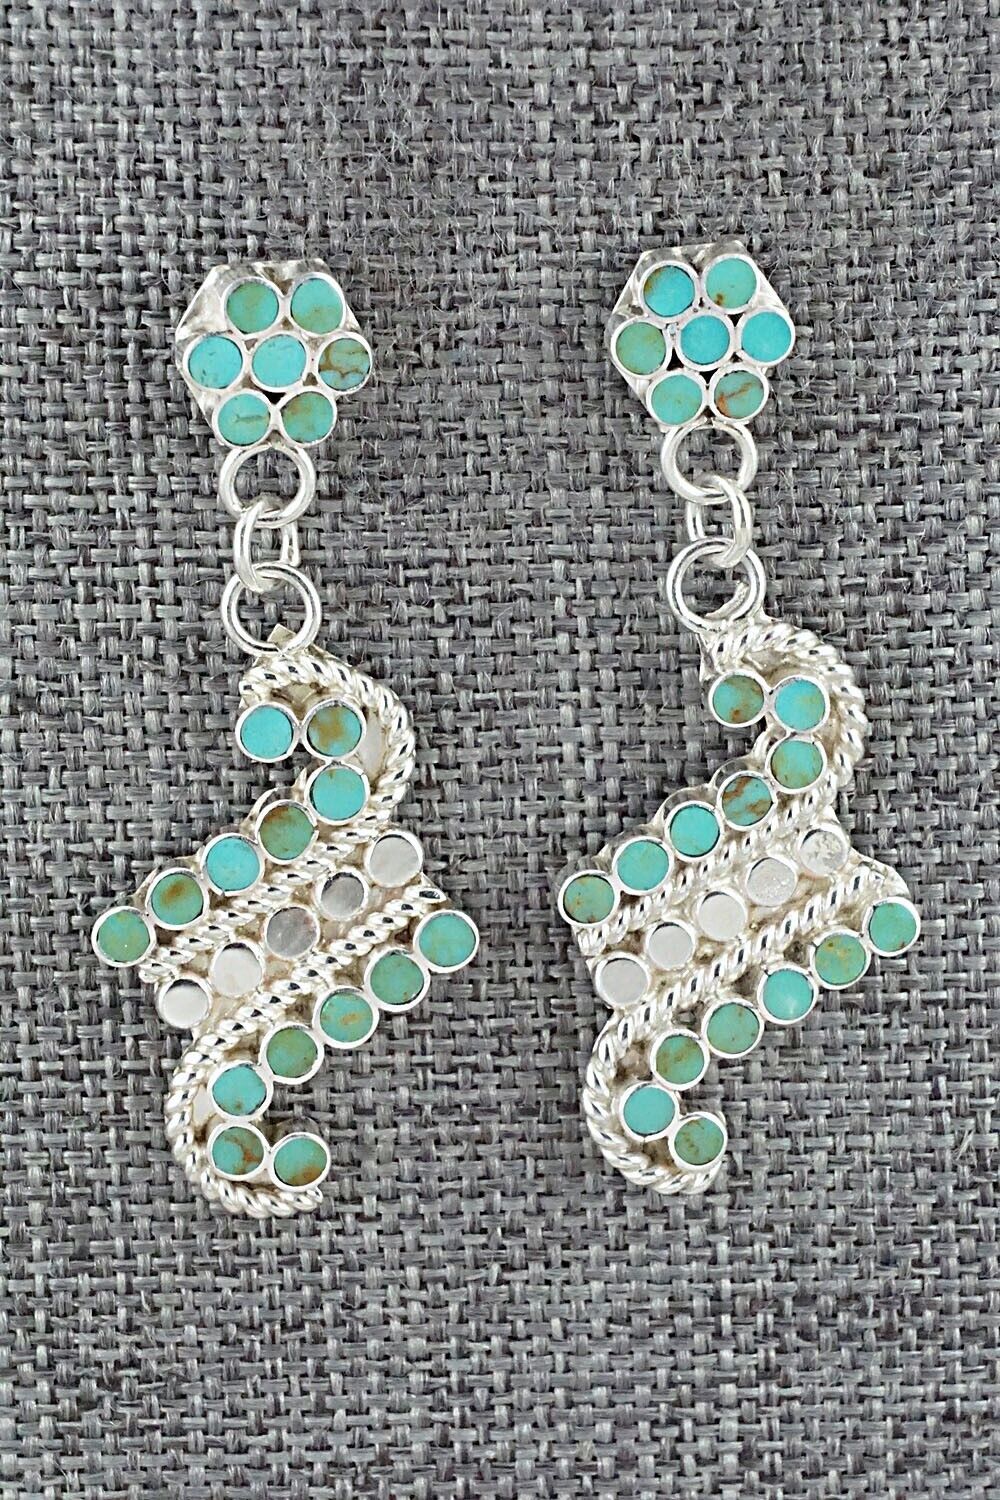 Turquoise & Sterling Silver Earrings - Michelle Peina